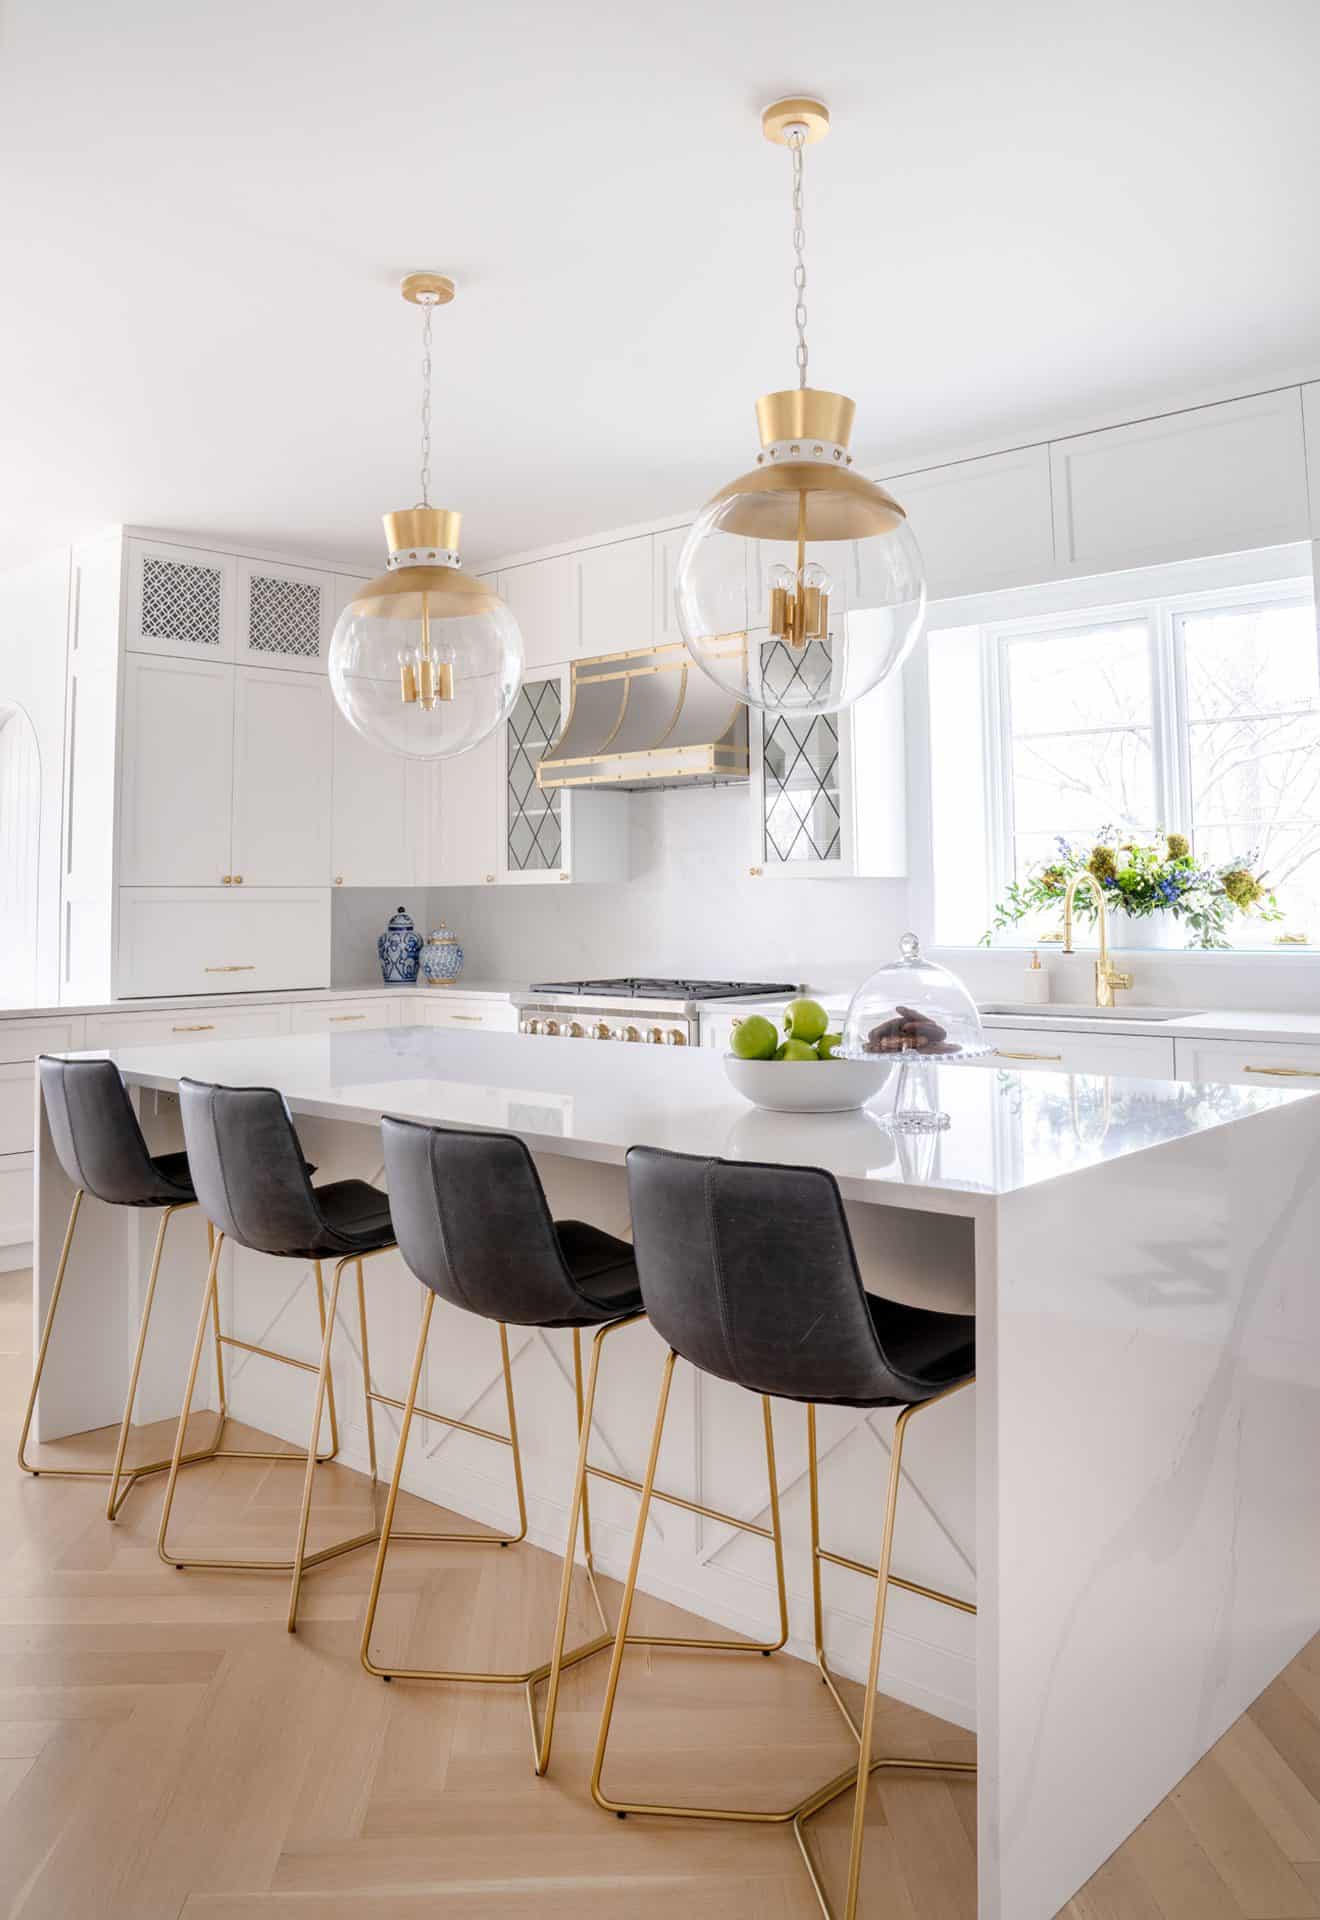 Classic kitchen with white marble waterfall island, and gold accents